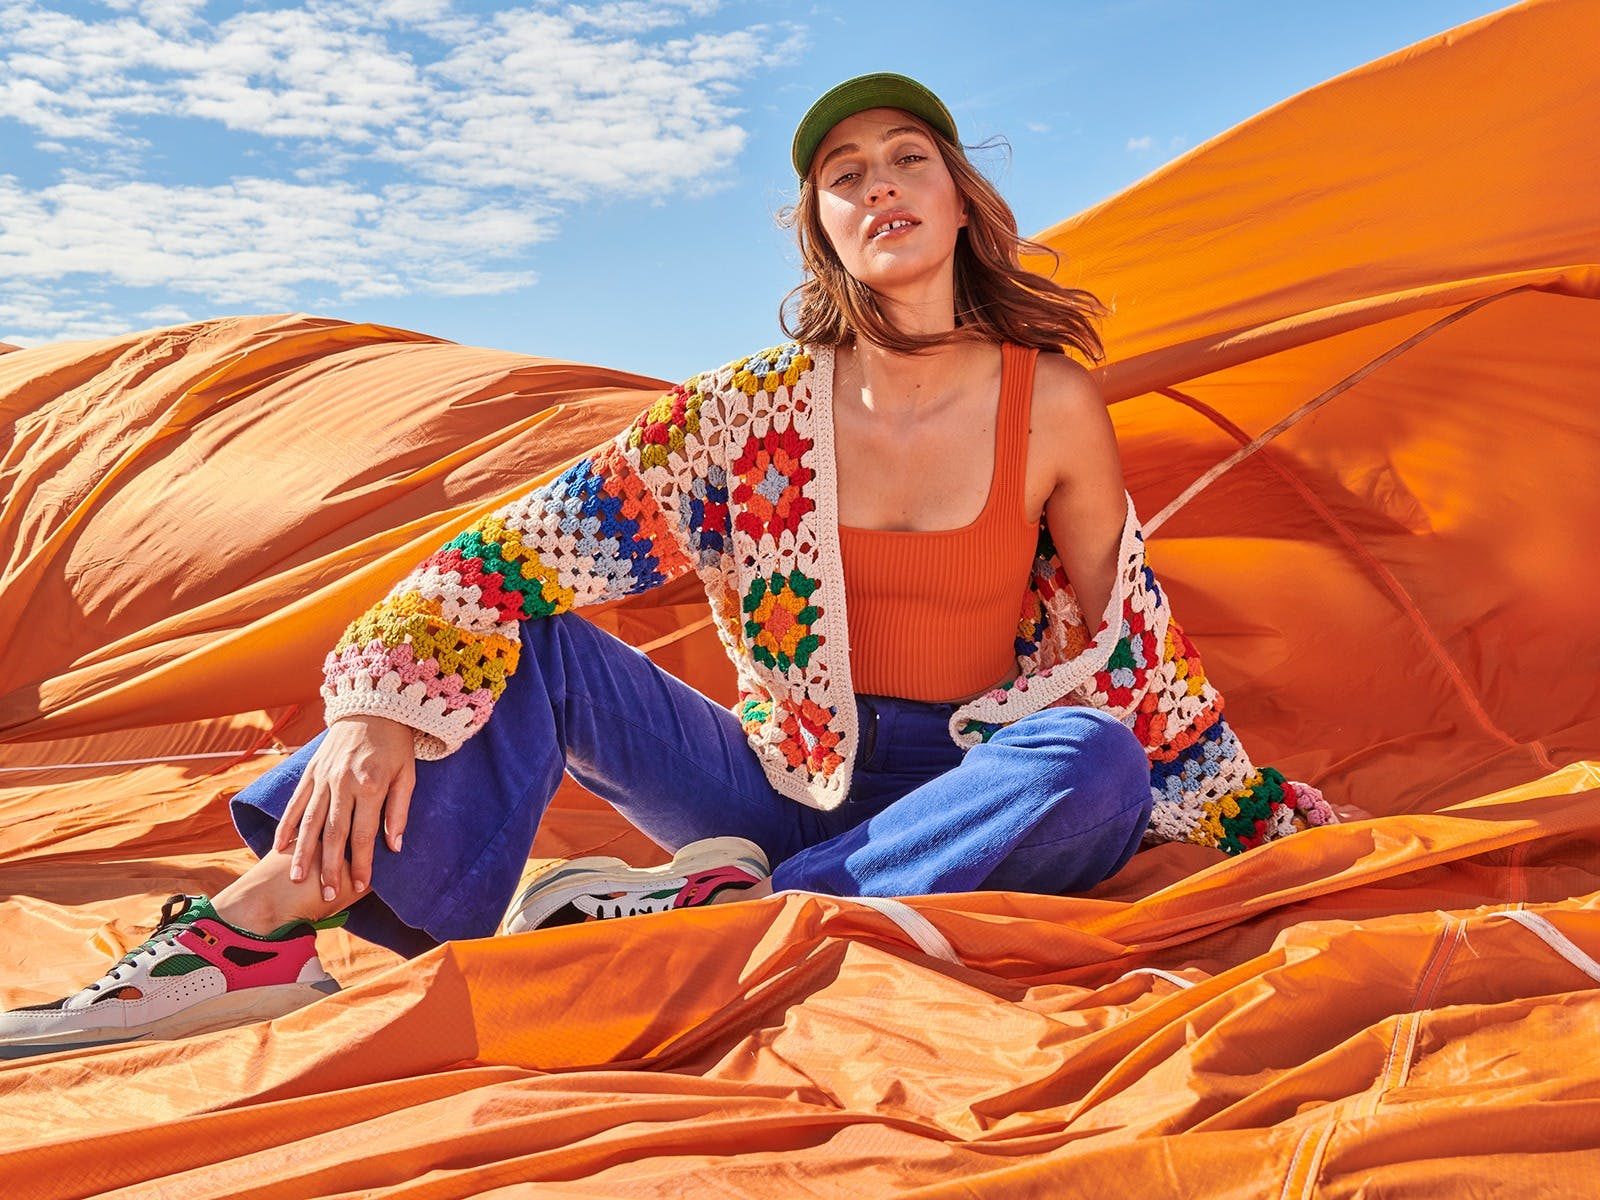 Model wears crochet cardi, cami, flares pants surrounded by parachute blowing in wind